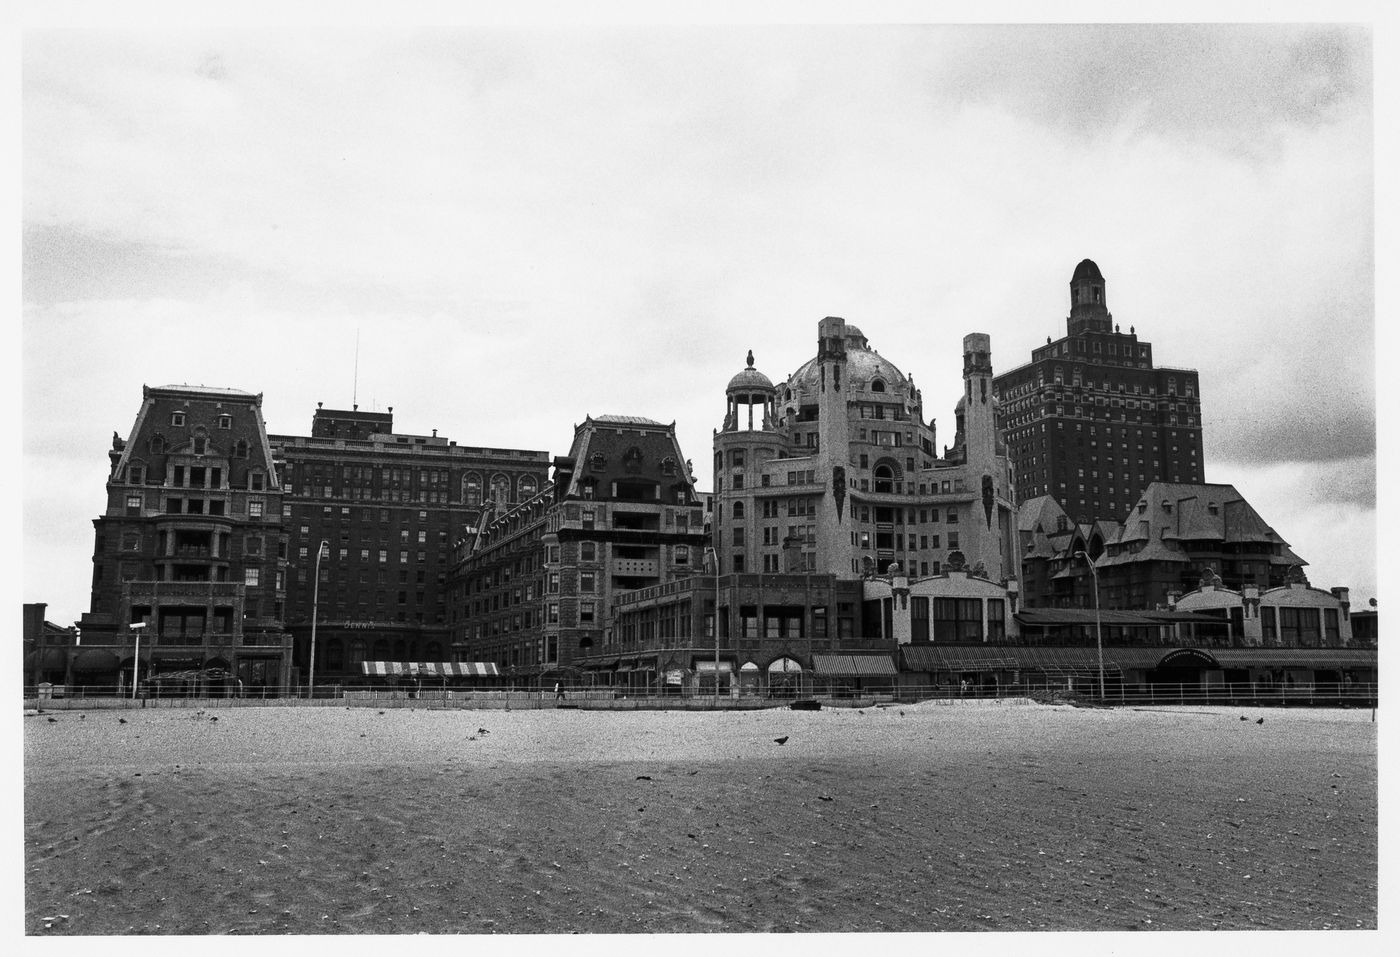 View of holiday resorts from the beach, Atlantic City, New Jersey